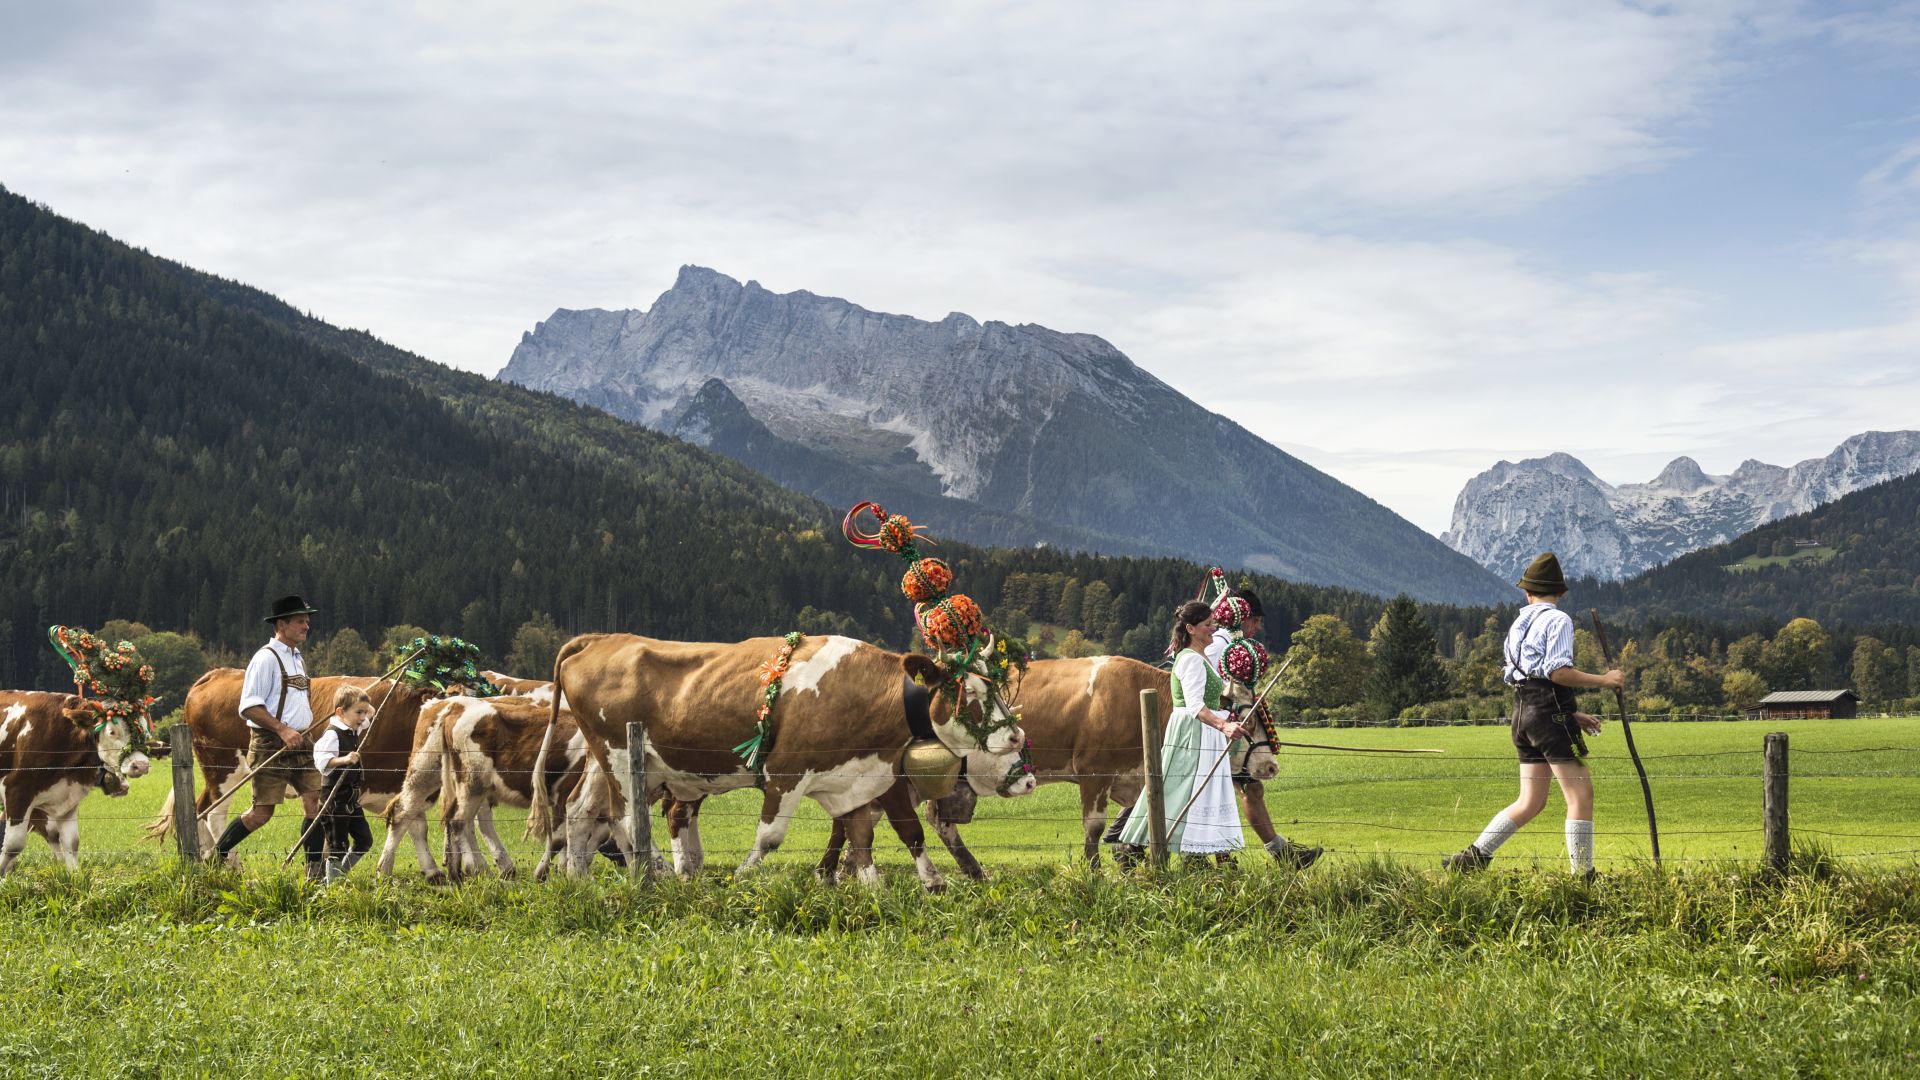 Berchtesgaden: Cows and shepherds come from the Saletalm